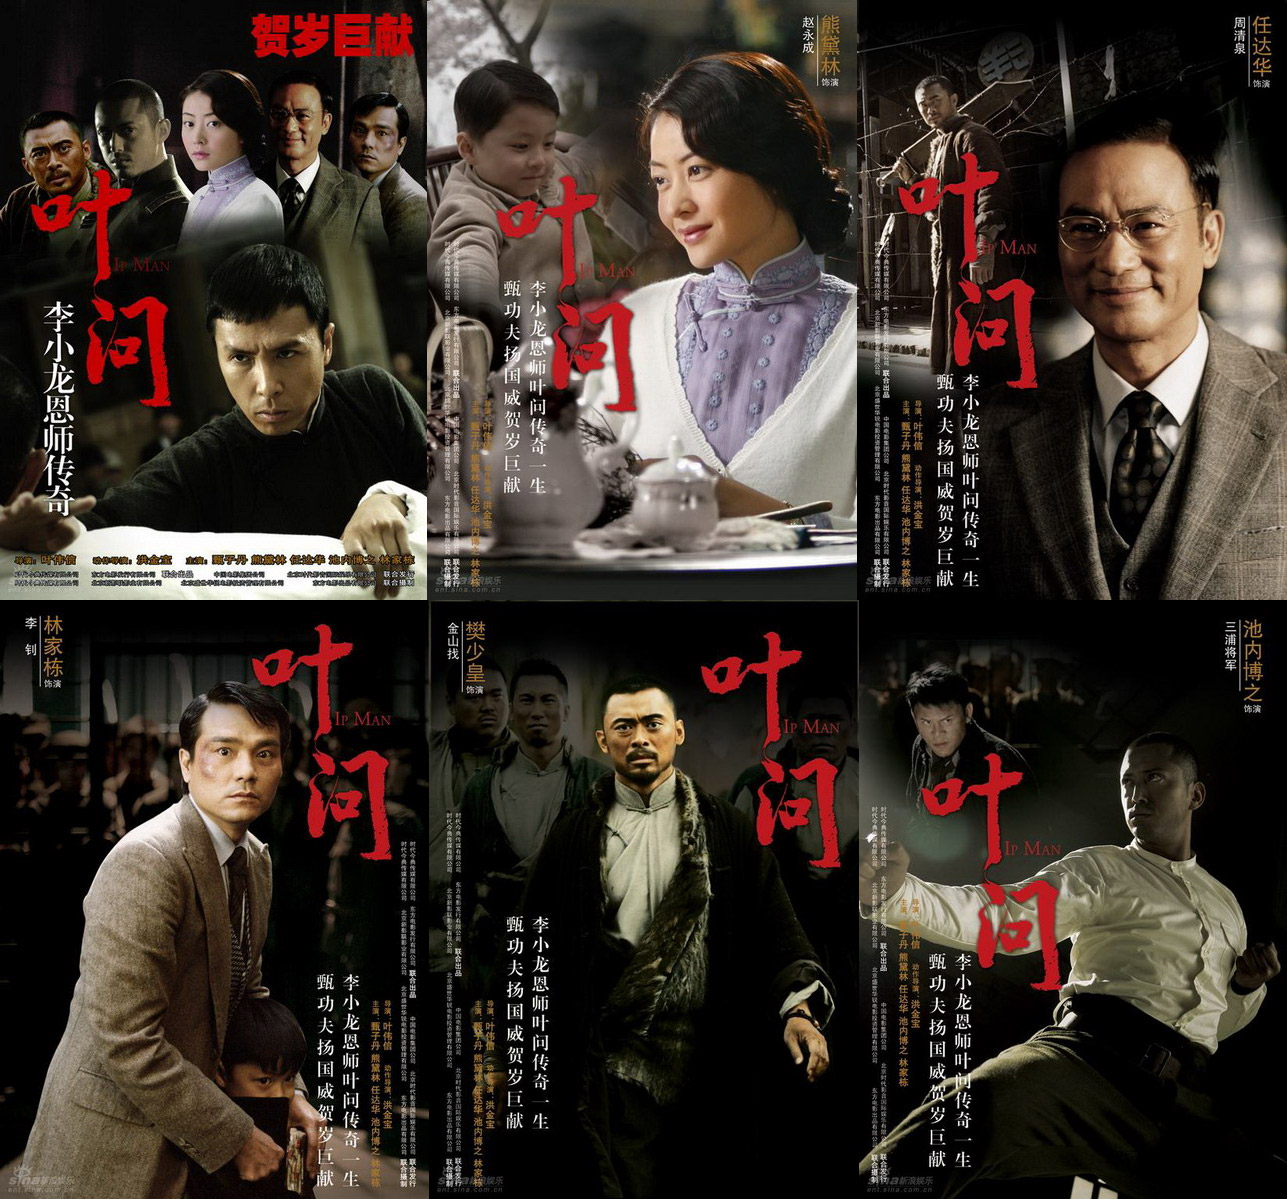 IP man review op MoviePulp and other fiction